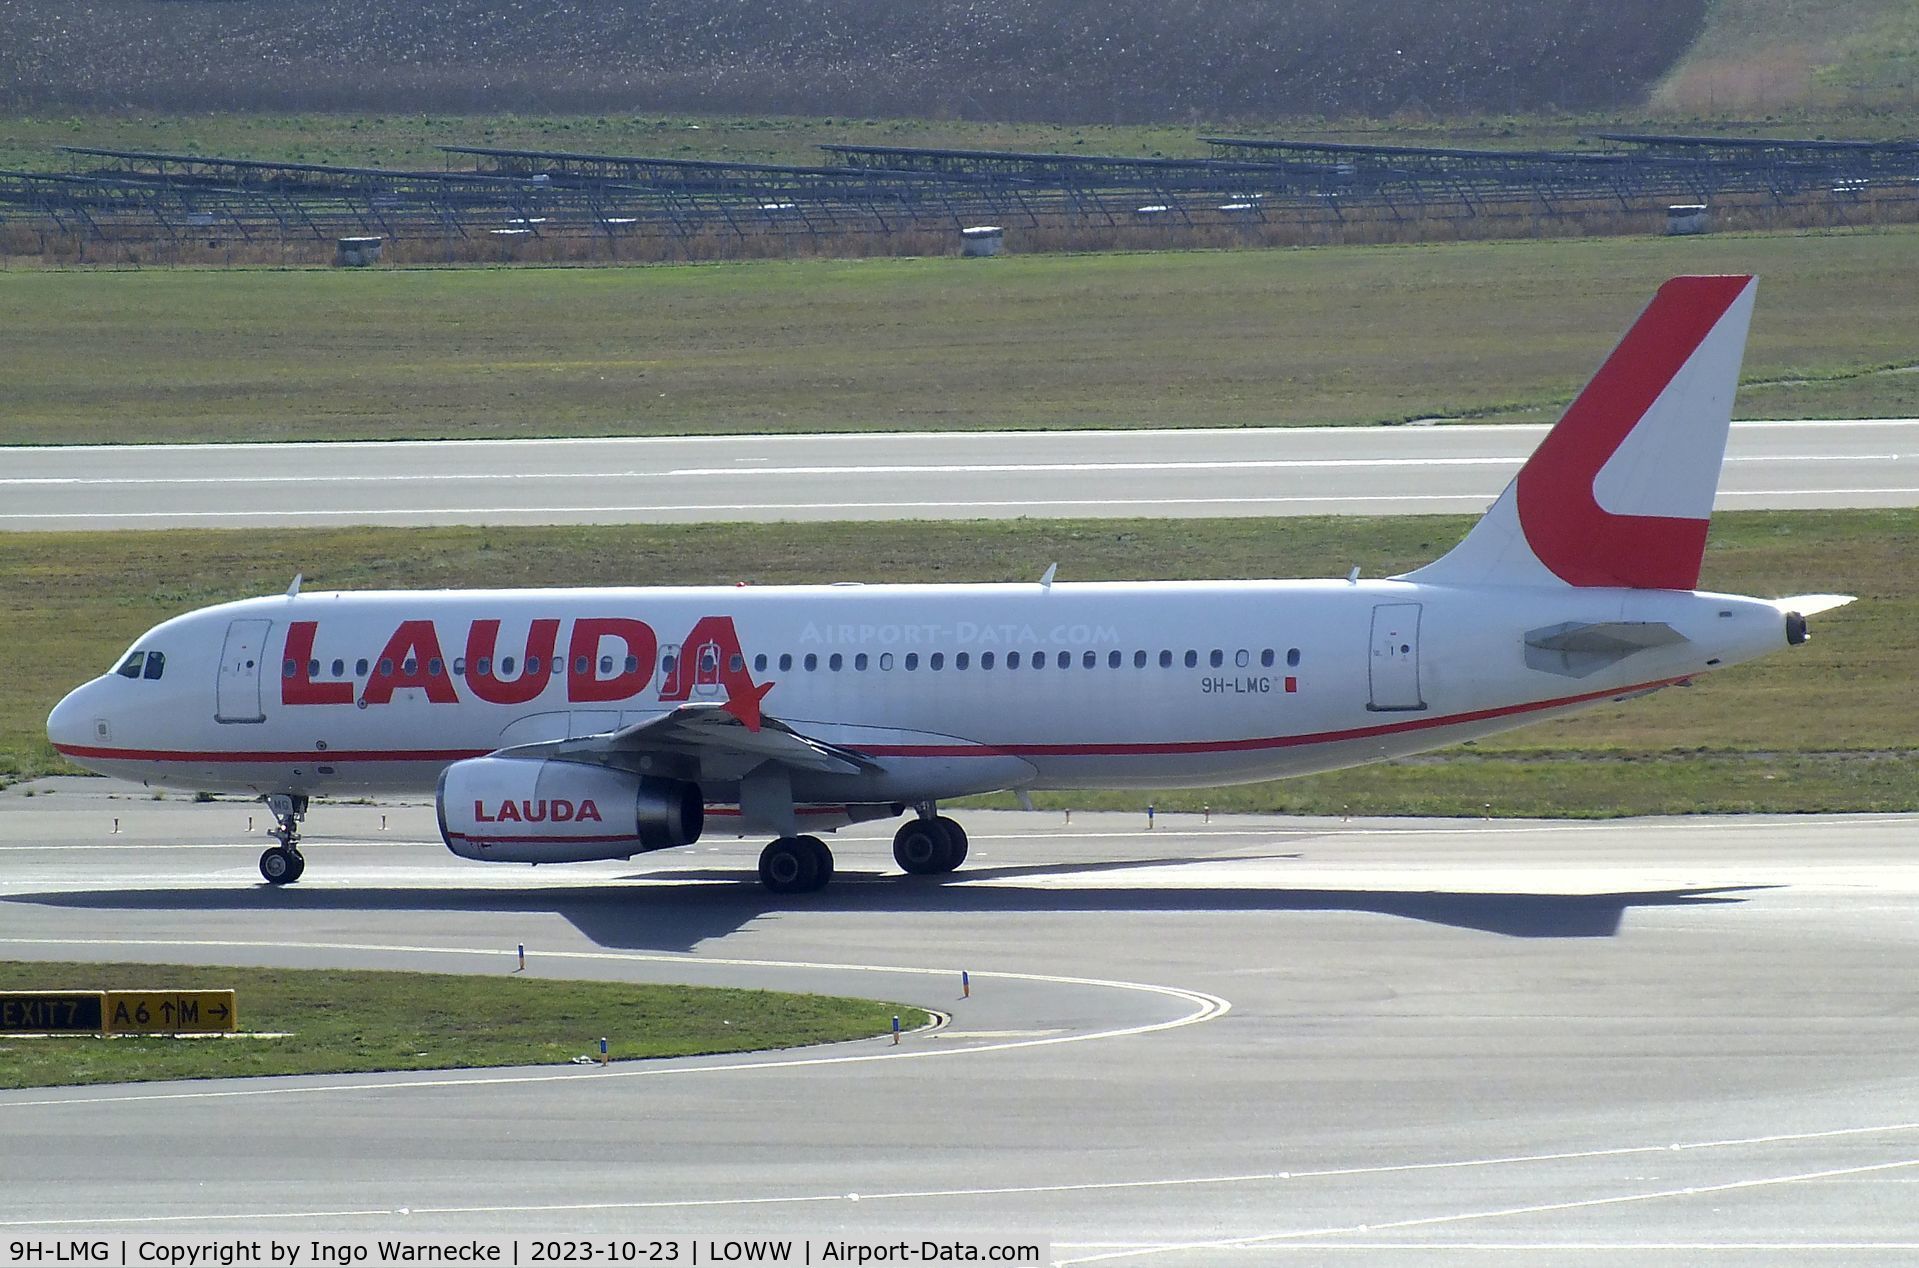 9H-LMG, 2011 Airbus A320-232 C/N 4603, Airbus A320-232 of Lauda Europe at Wien-Schwechat airport